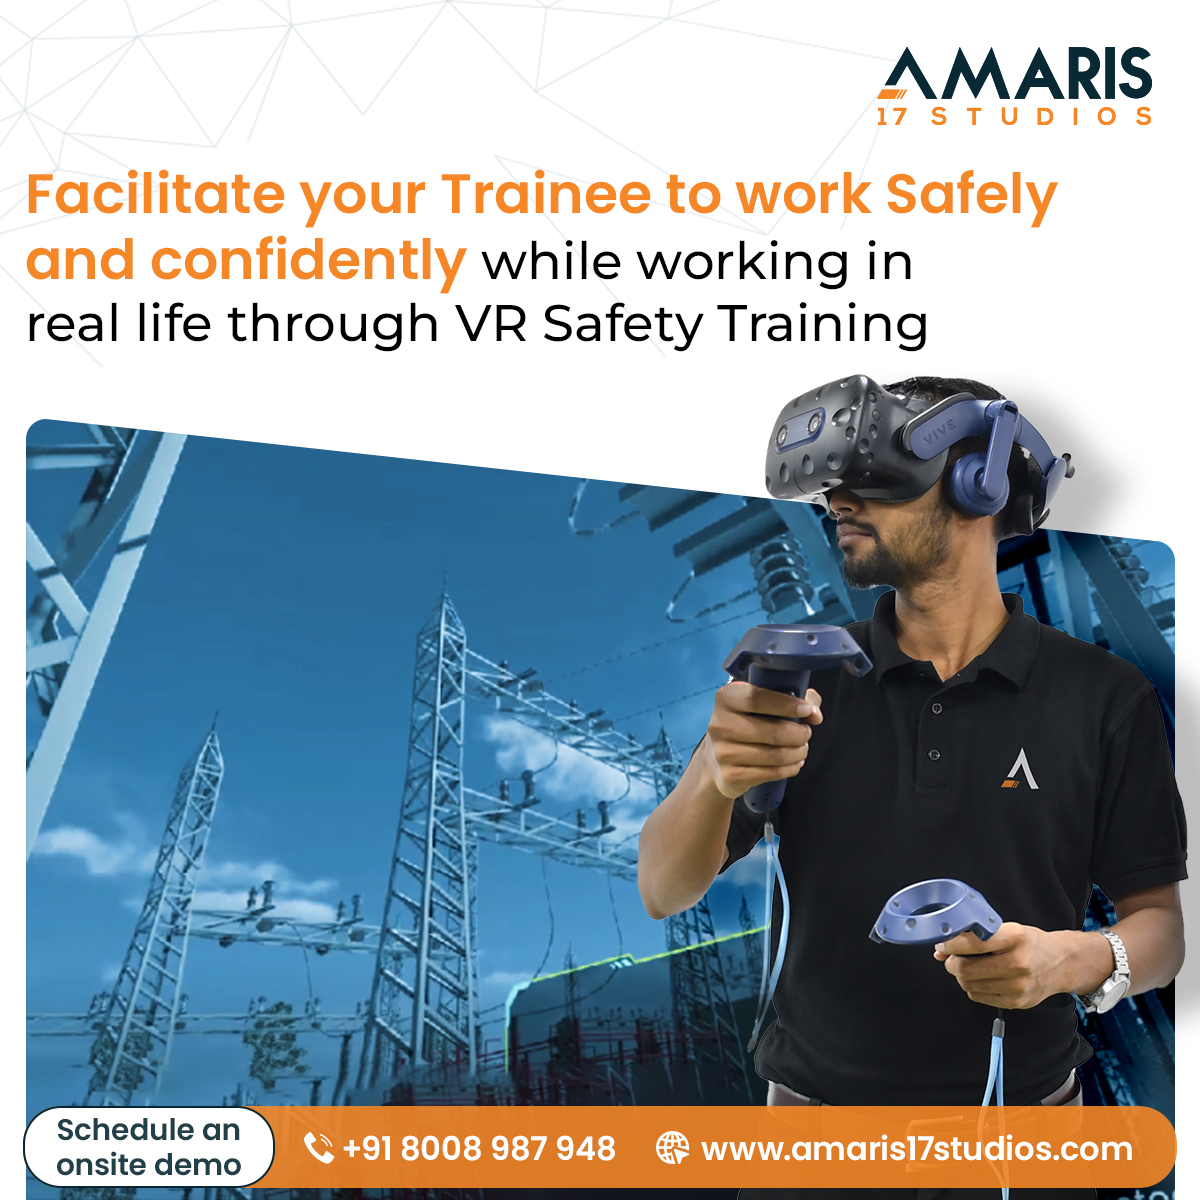 Facilitate your Trainee to work Safely and confidently while working in real life through VR Safety Training

For Onsite Demo
📱 +918008987948 📧 info@amaris17studios.com 🌐 amaris17studios.com

#safetyfirst #vrtraining #workplacesafety #vrtraining #hazardawareness